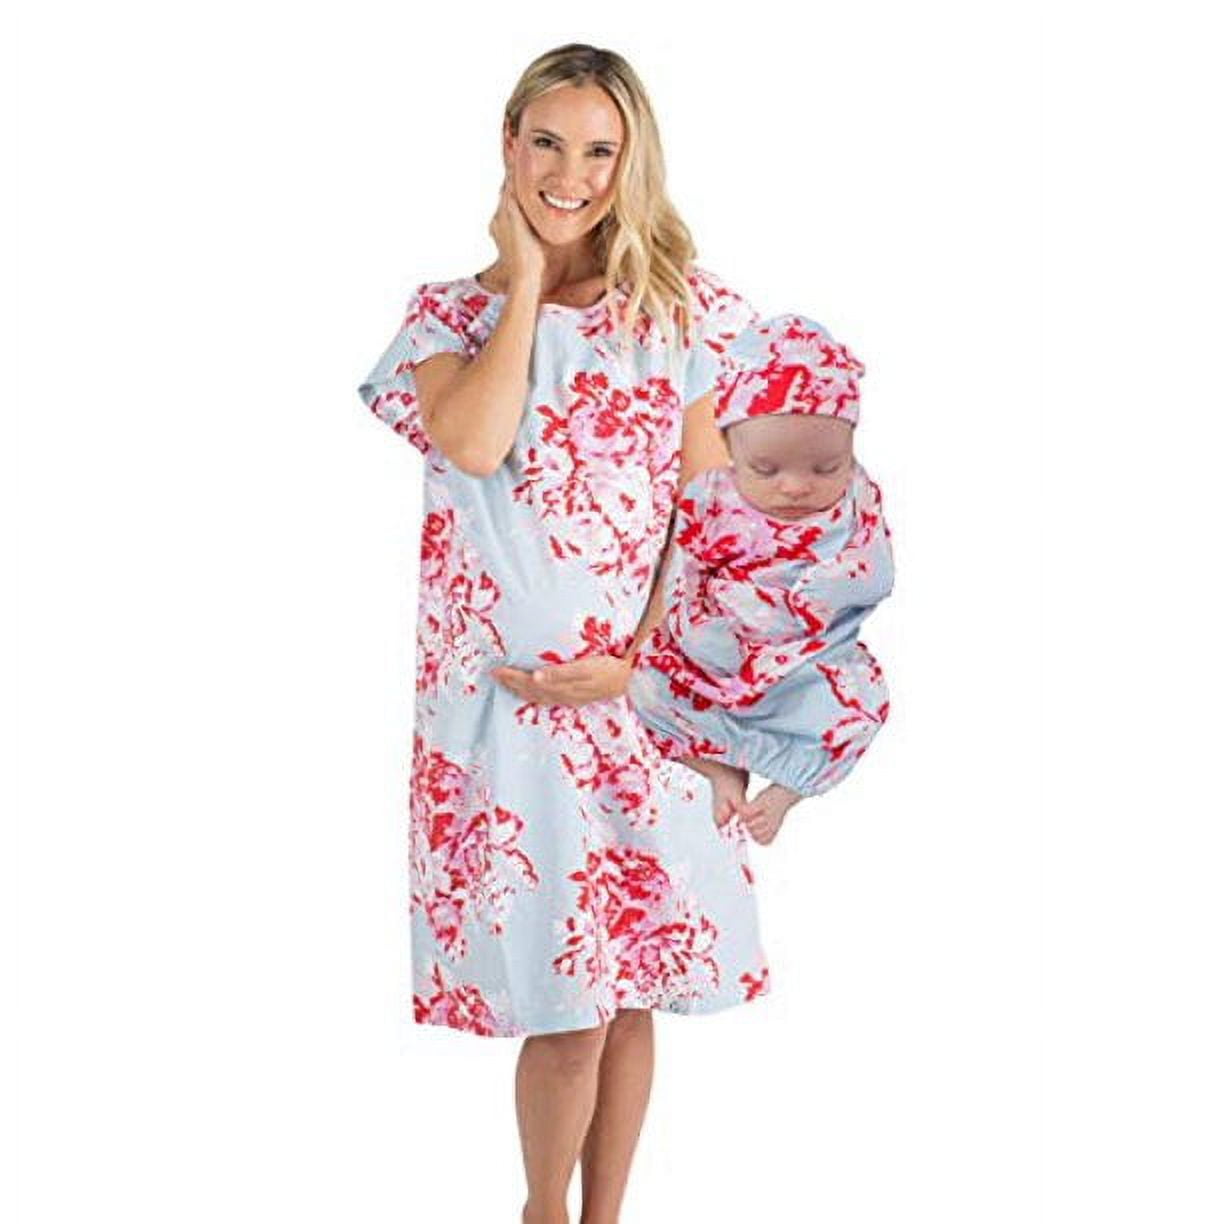 Baby Be Mine Mommy Set Matching Labor Delivery Maternity Hospital Gown Gownie Maternity Bag Must Have Gown 6059441f 49bb 4ab1 85be 268e61fe2180.699d33c69780b95ea6dcee94bcf05fce